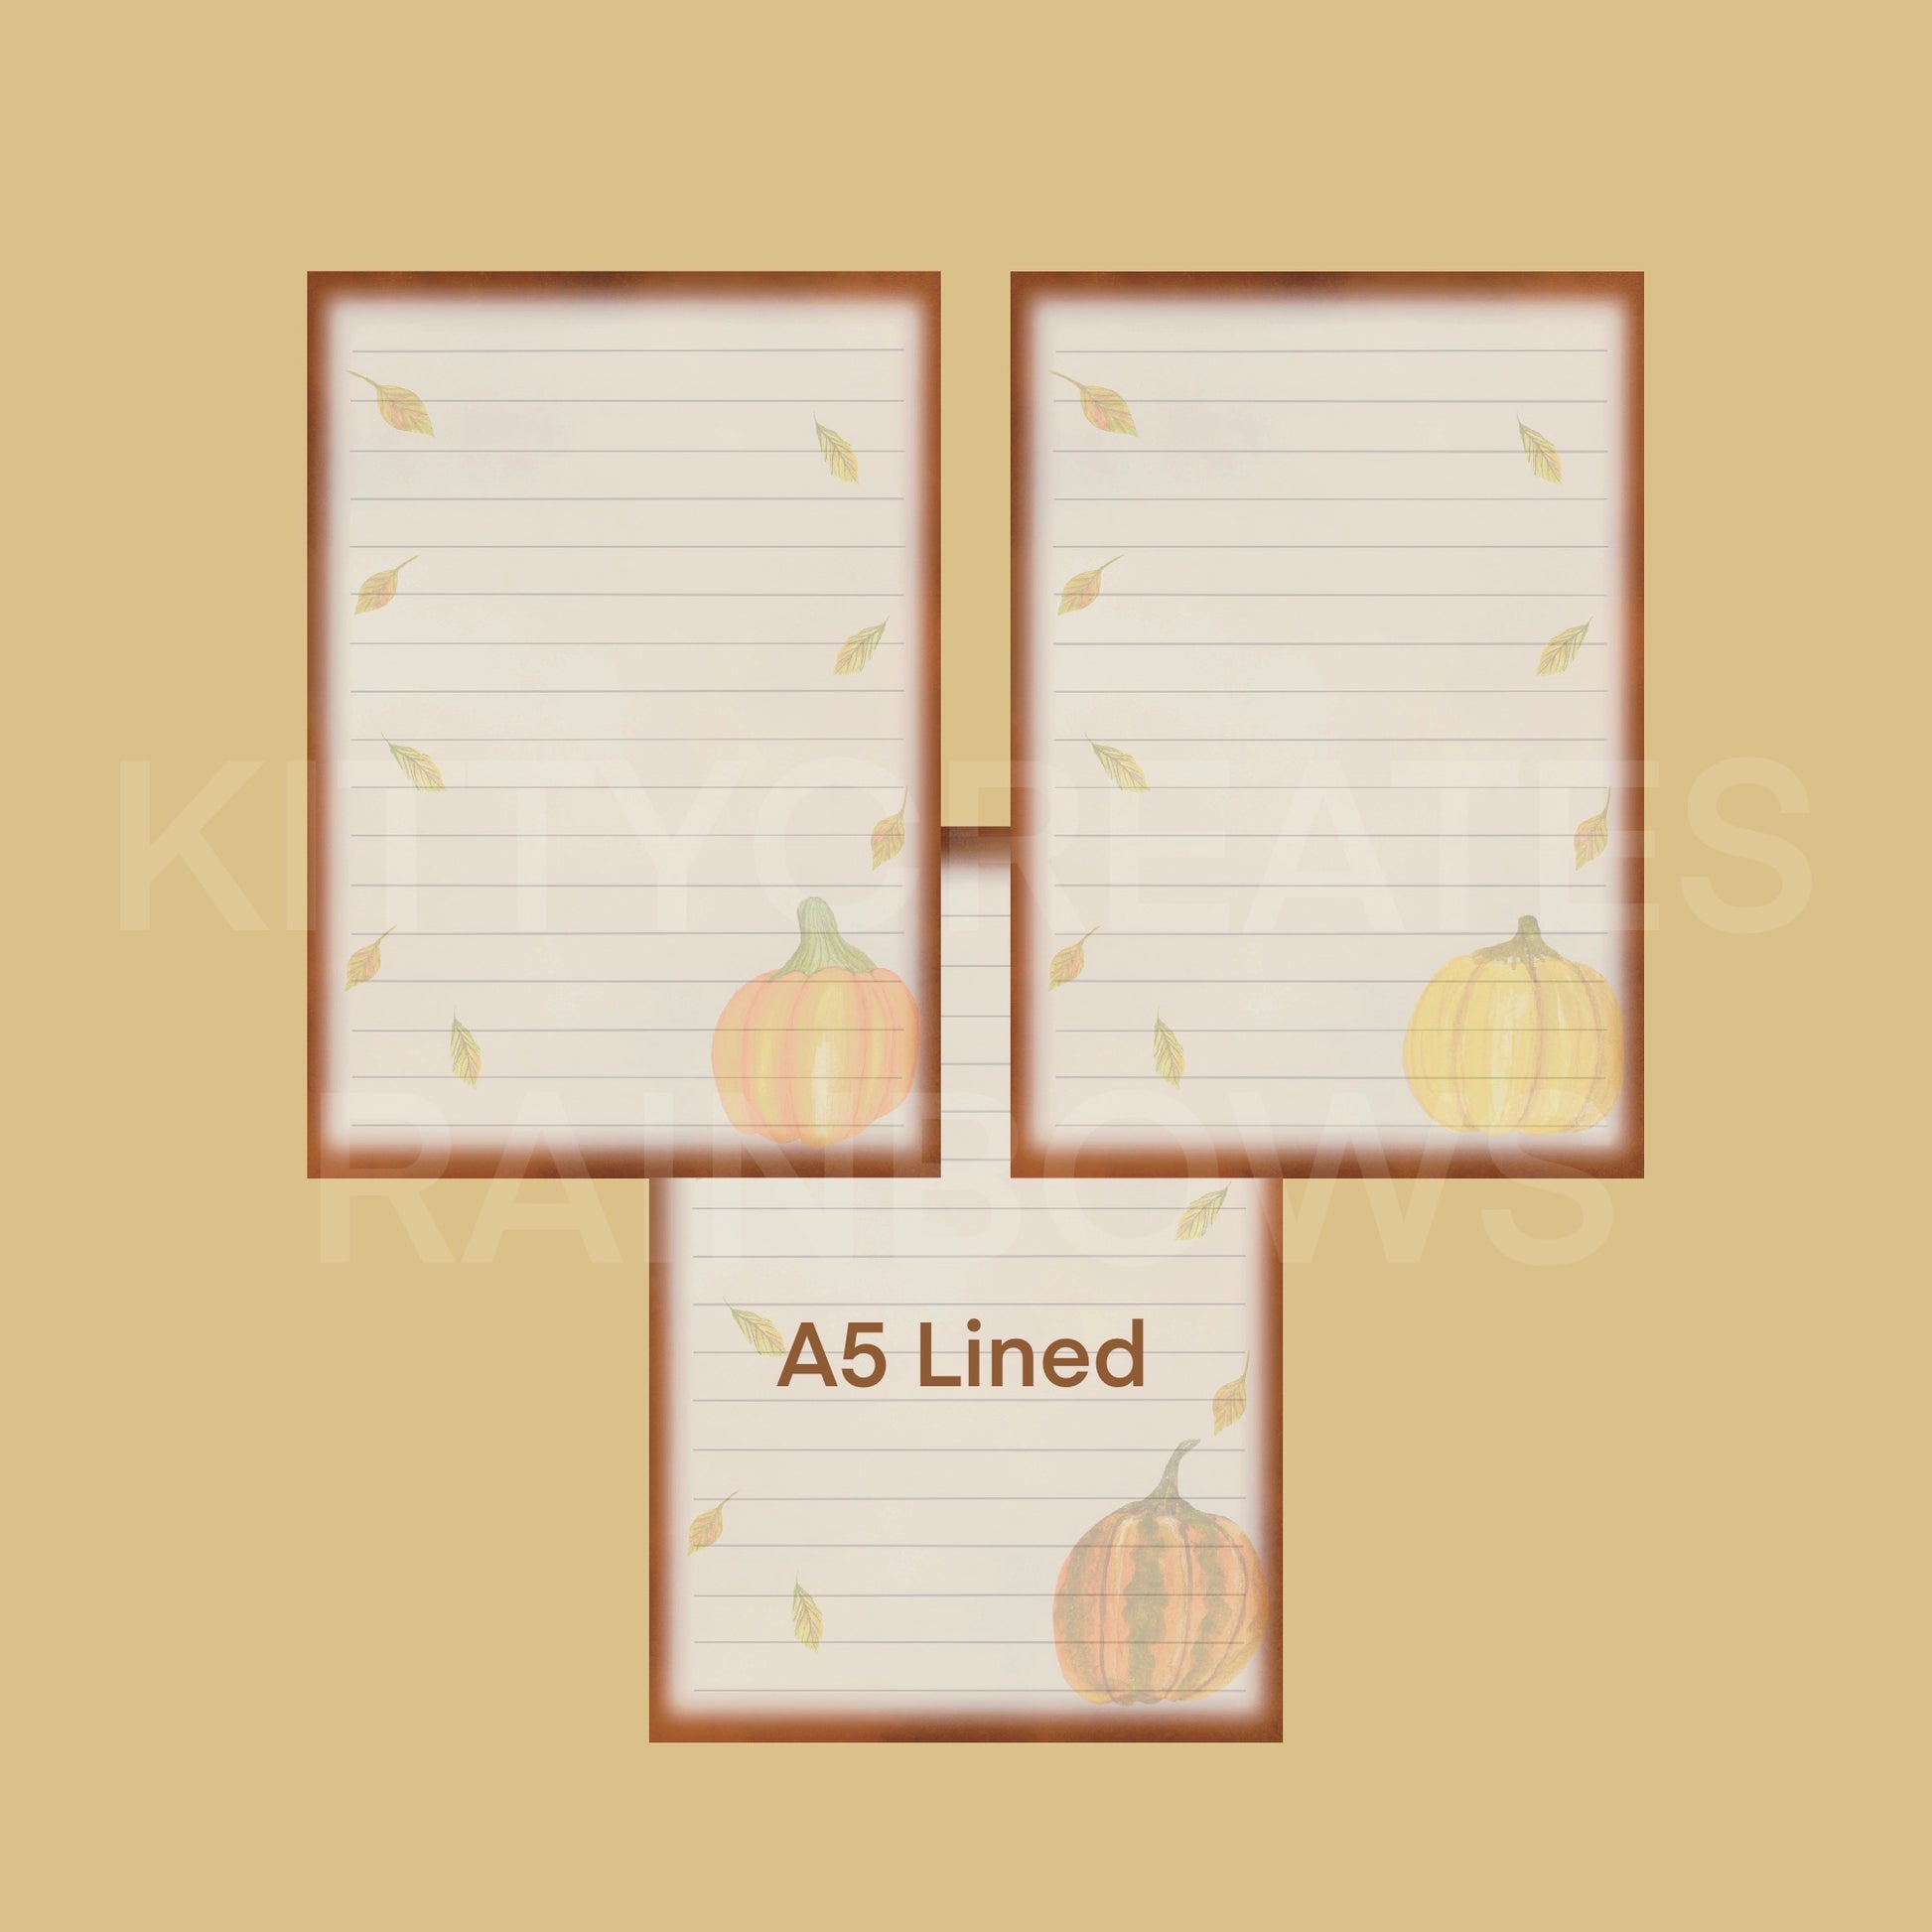 3 images of Fall Forage Pumpkin Writing Papers on a light brown yellow background and a white watermark saying Kitty Creates Rainbows. Text on bottom of image also says in brown text A5 Lined